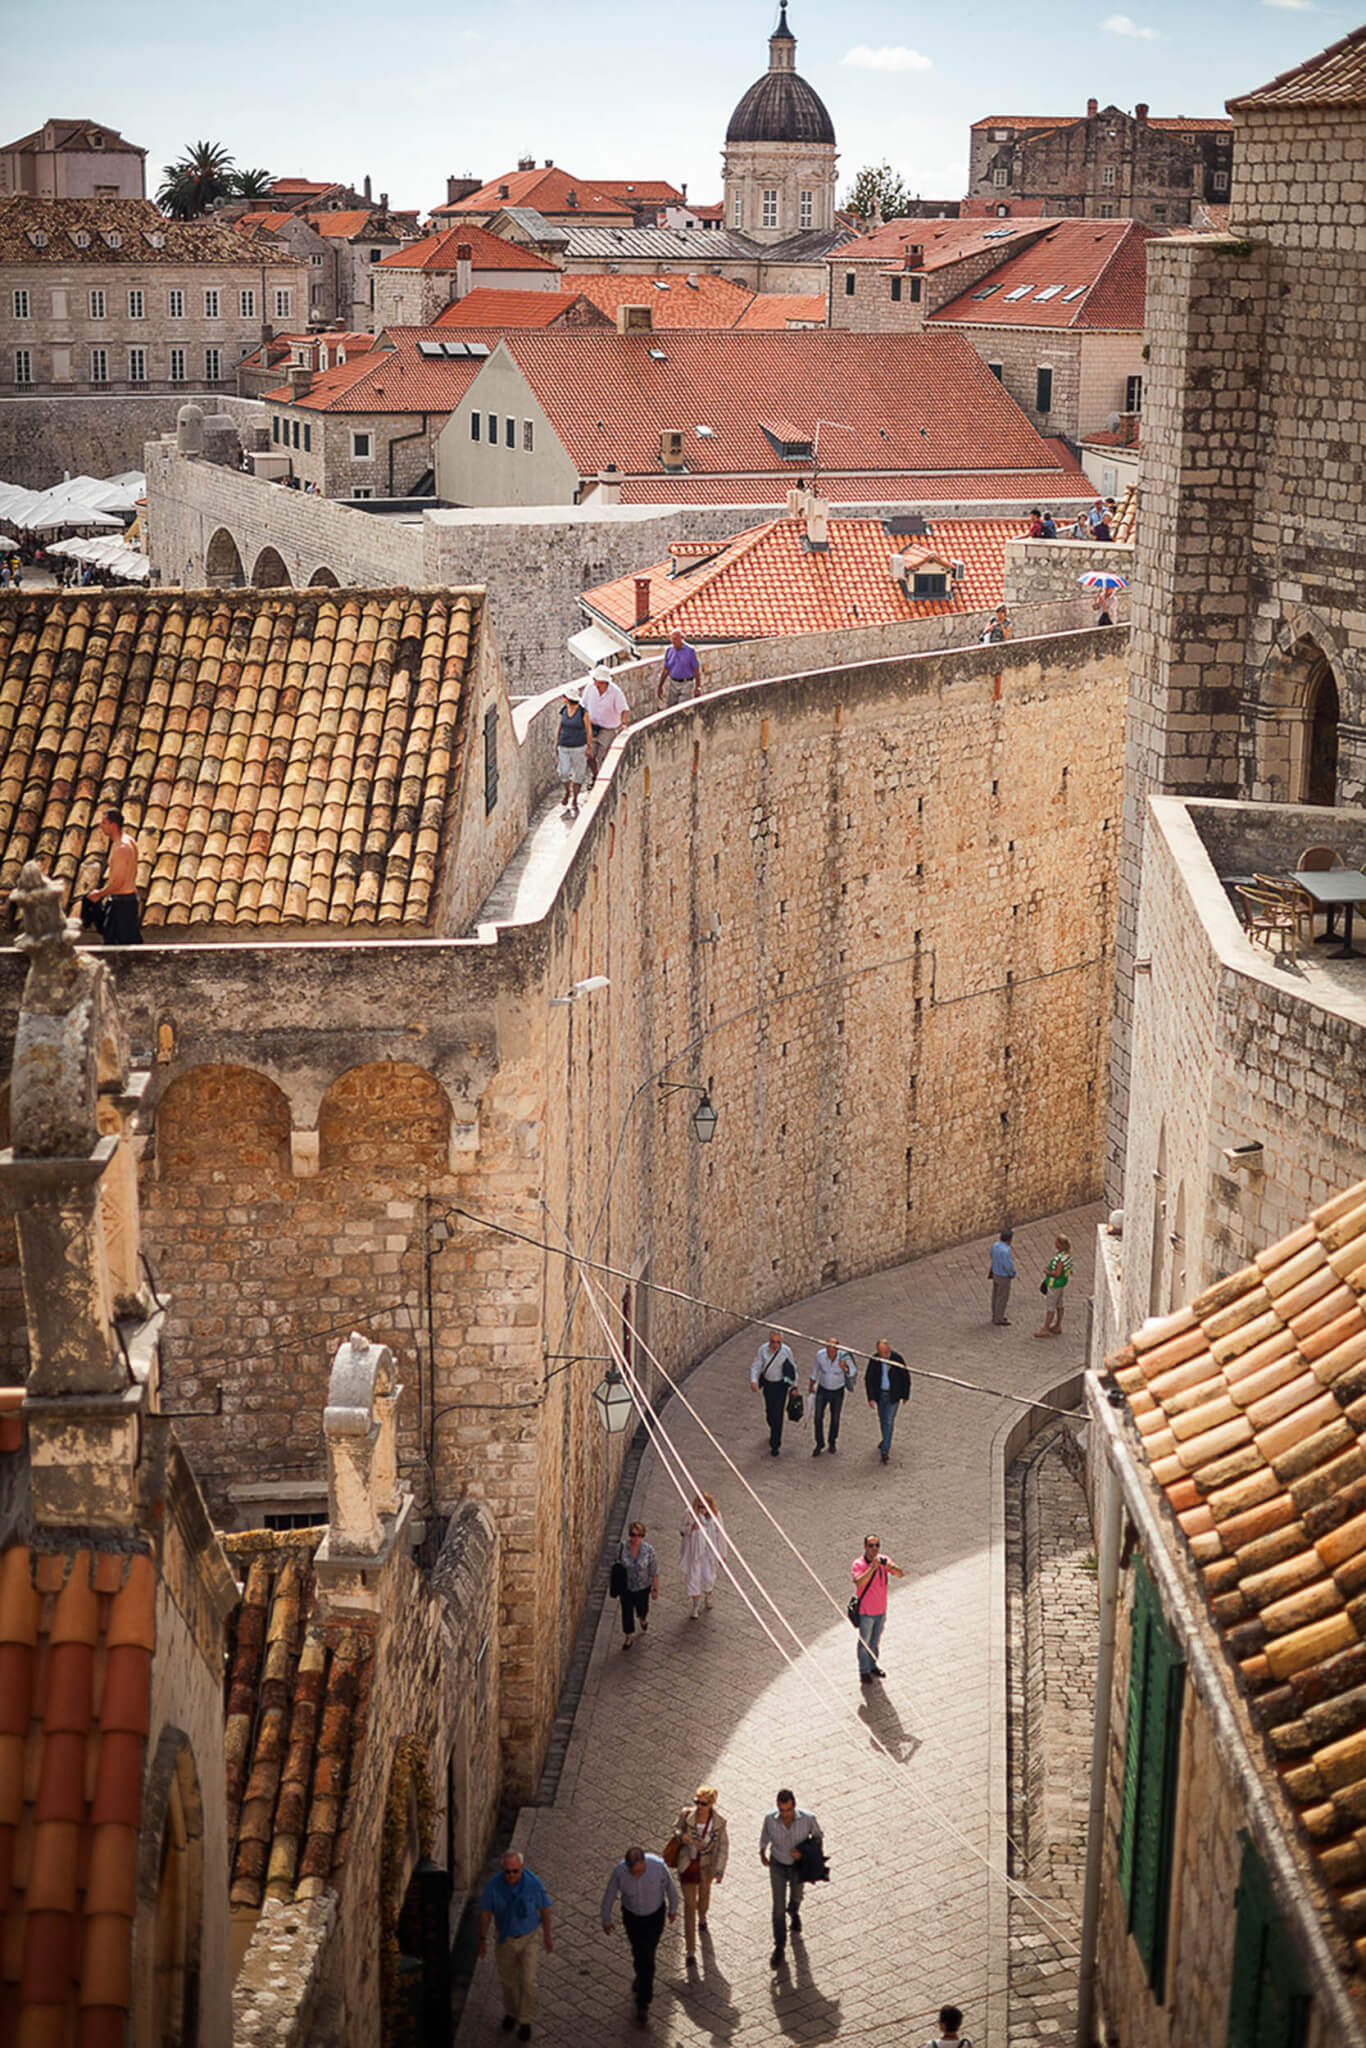 The Walled in city, Dubrovnik.